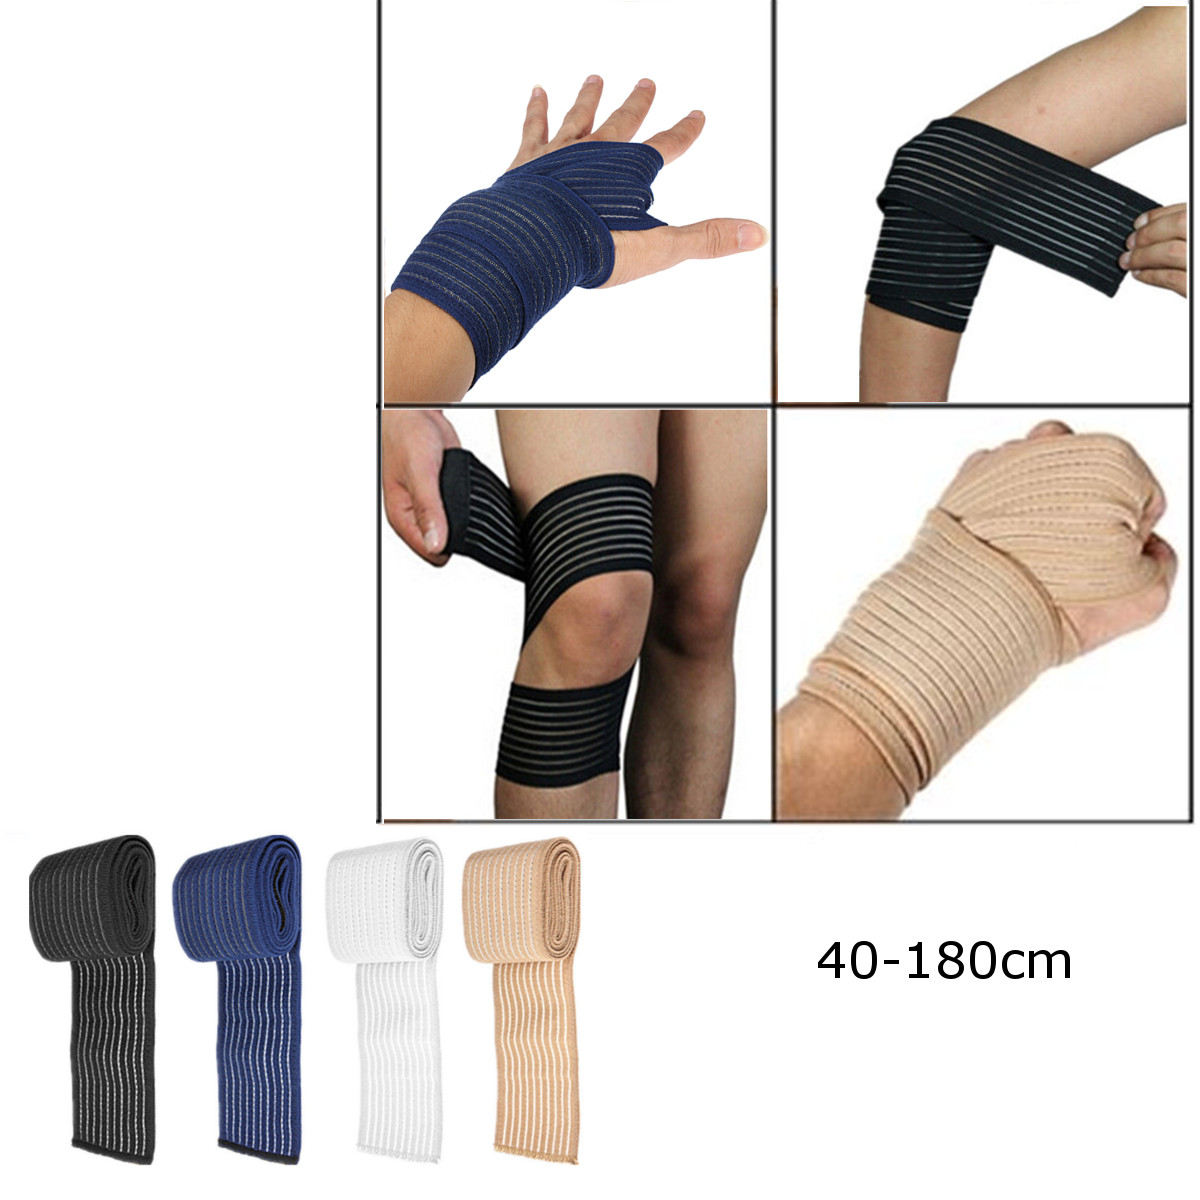 Elastic-Sports-Bandage-Knee-Pad-Support-Wrap-Knee-Band-Brace-Elbow-Calf-Arm-Support-950117-7